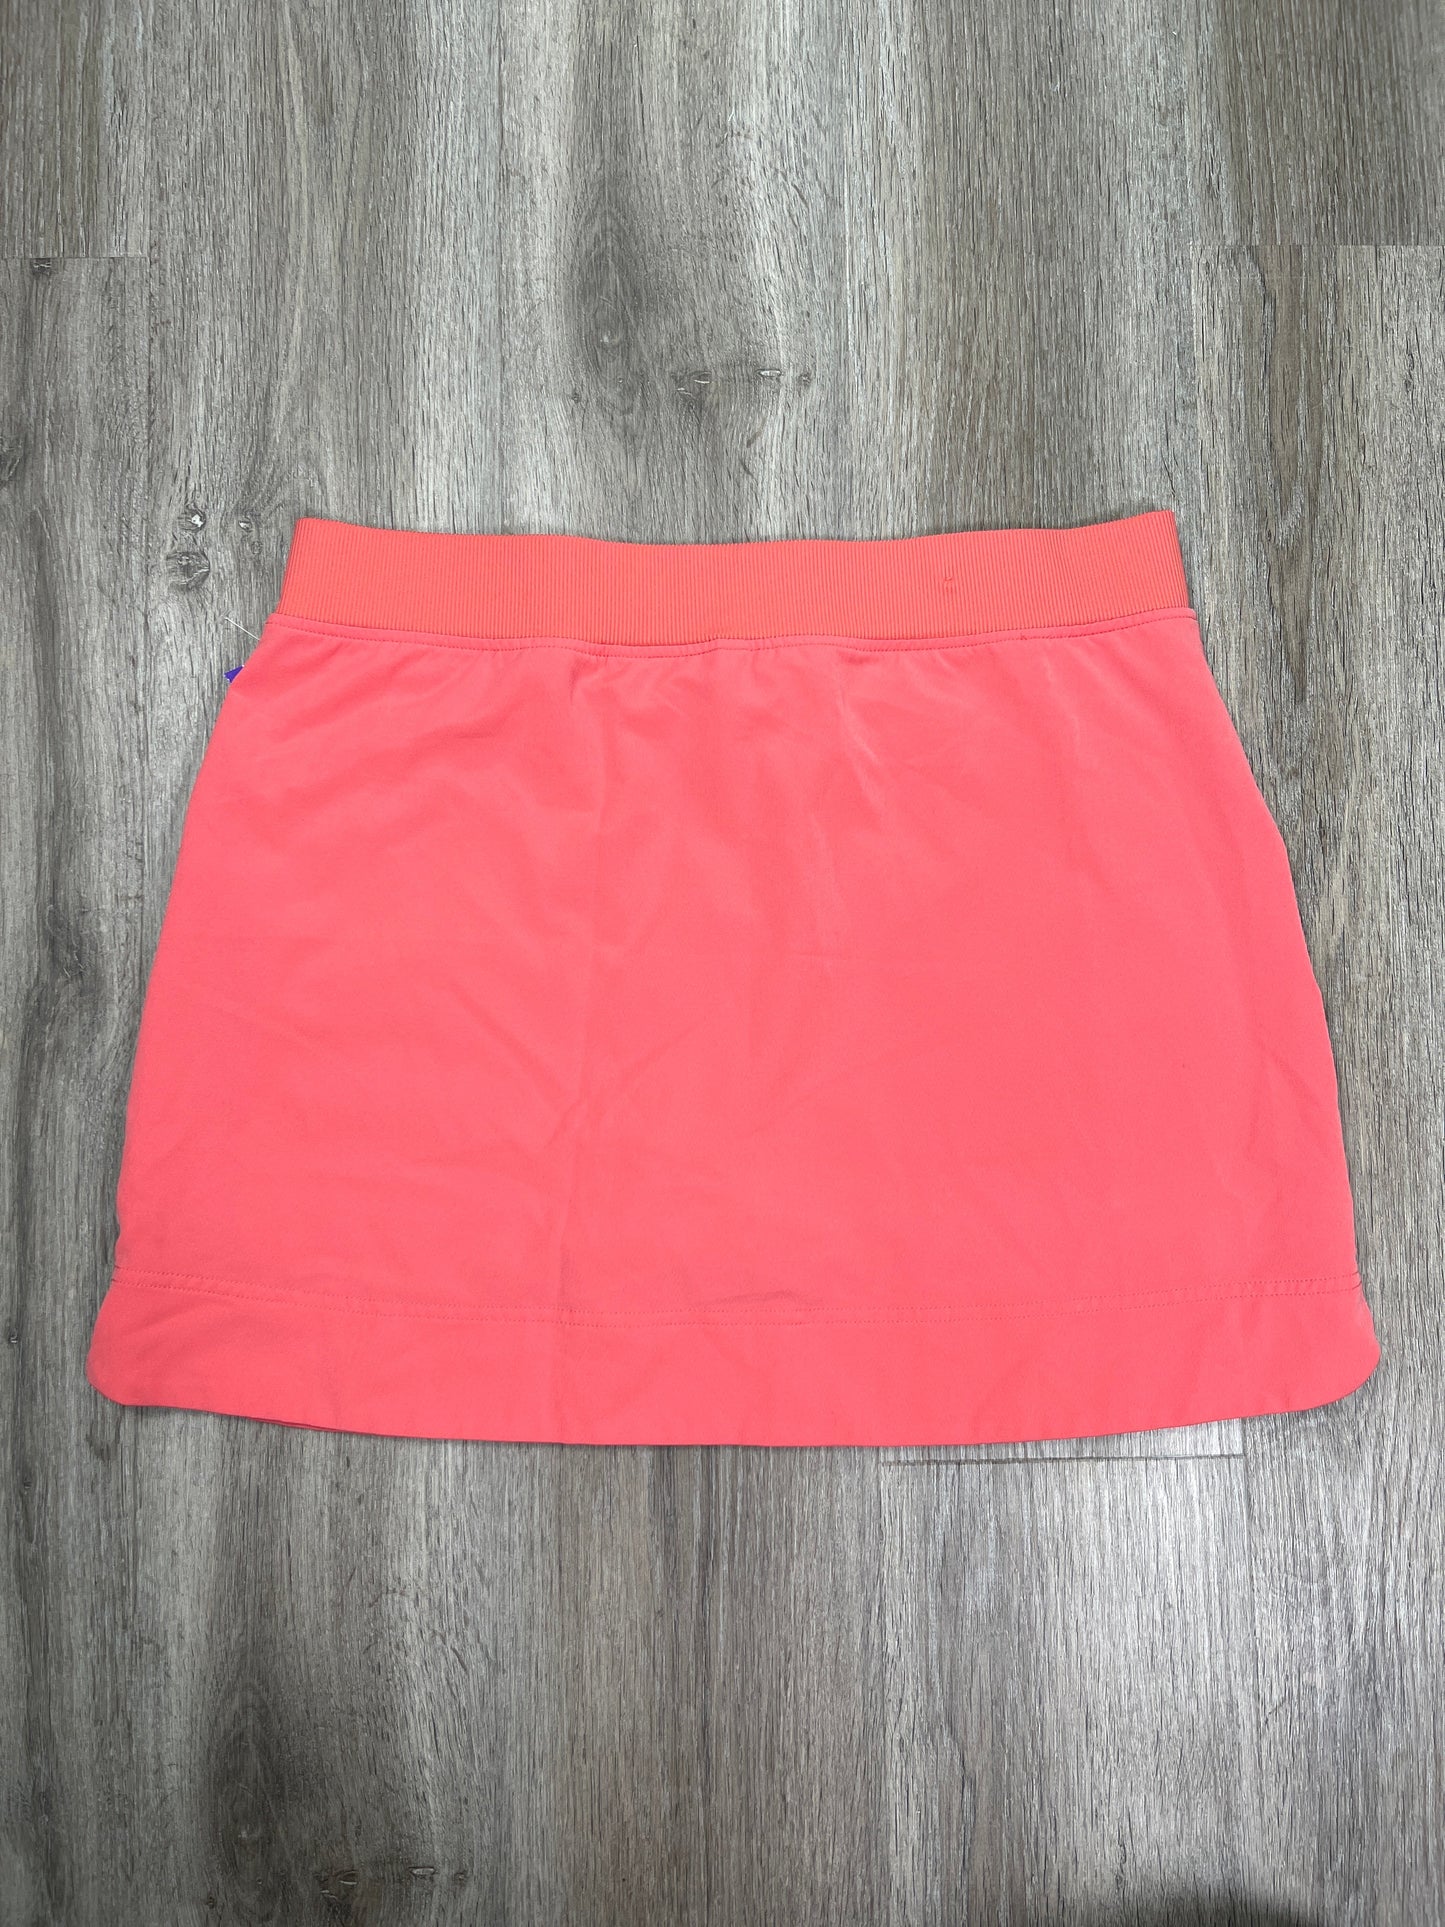 Athletic Skort By 32 Degrees  Size: L